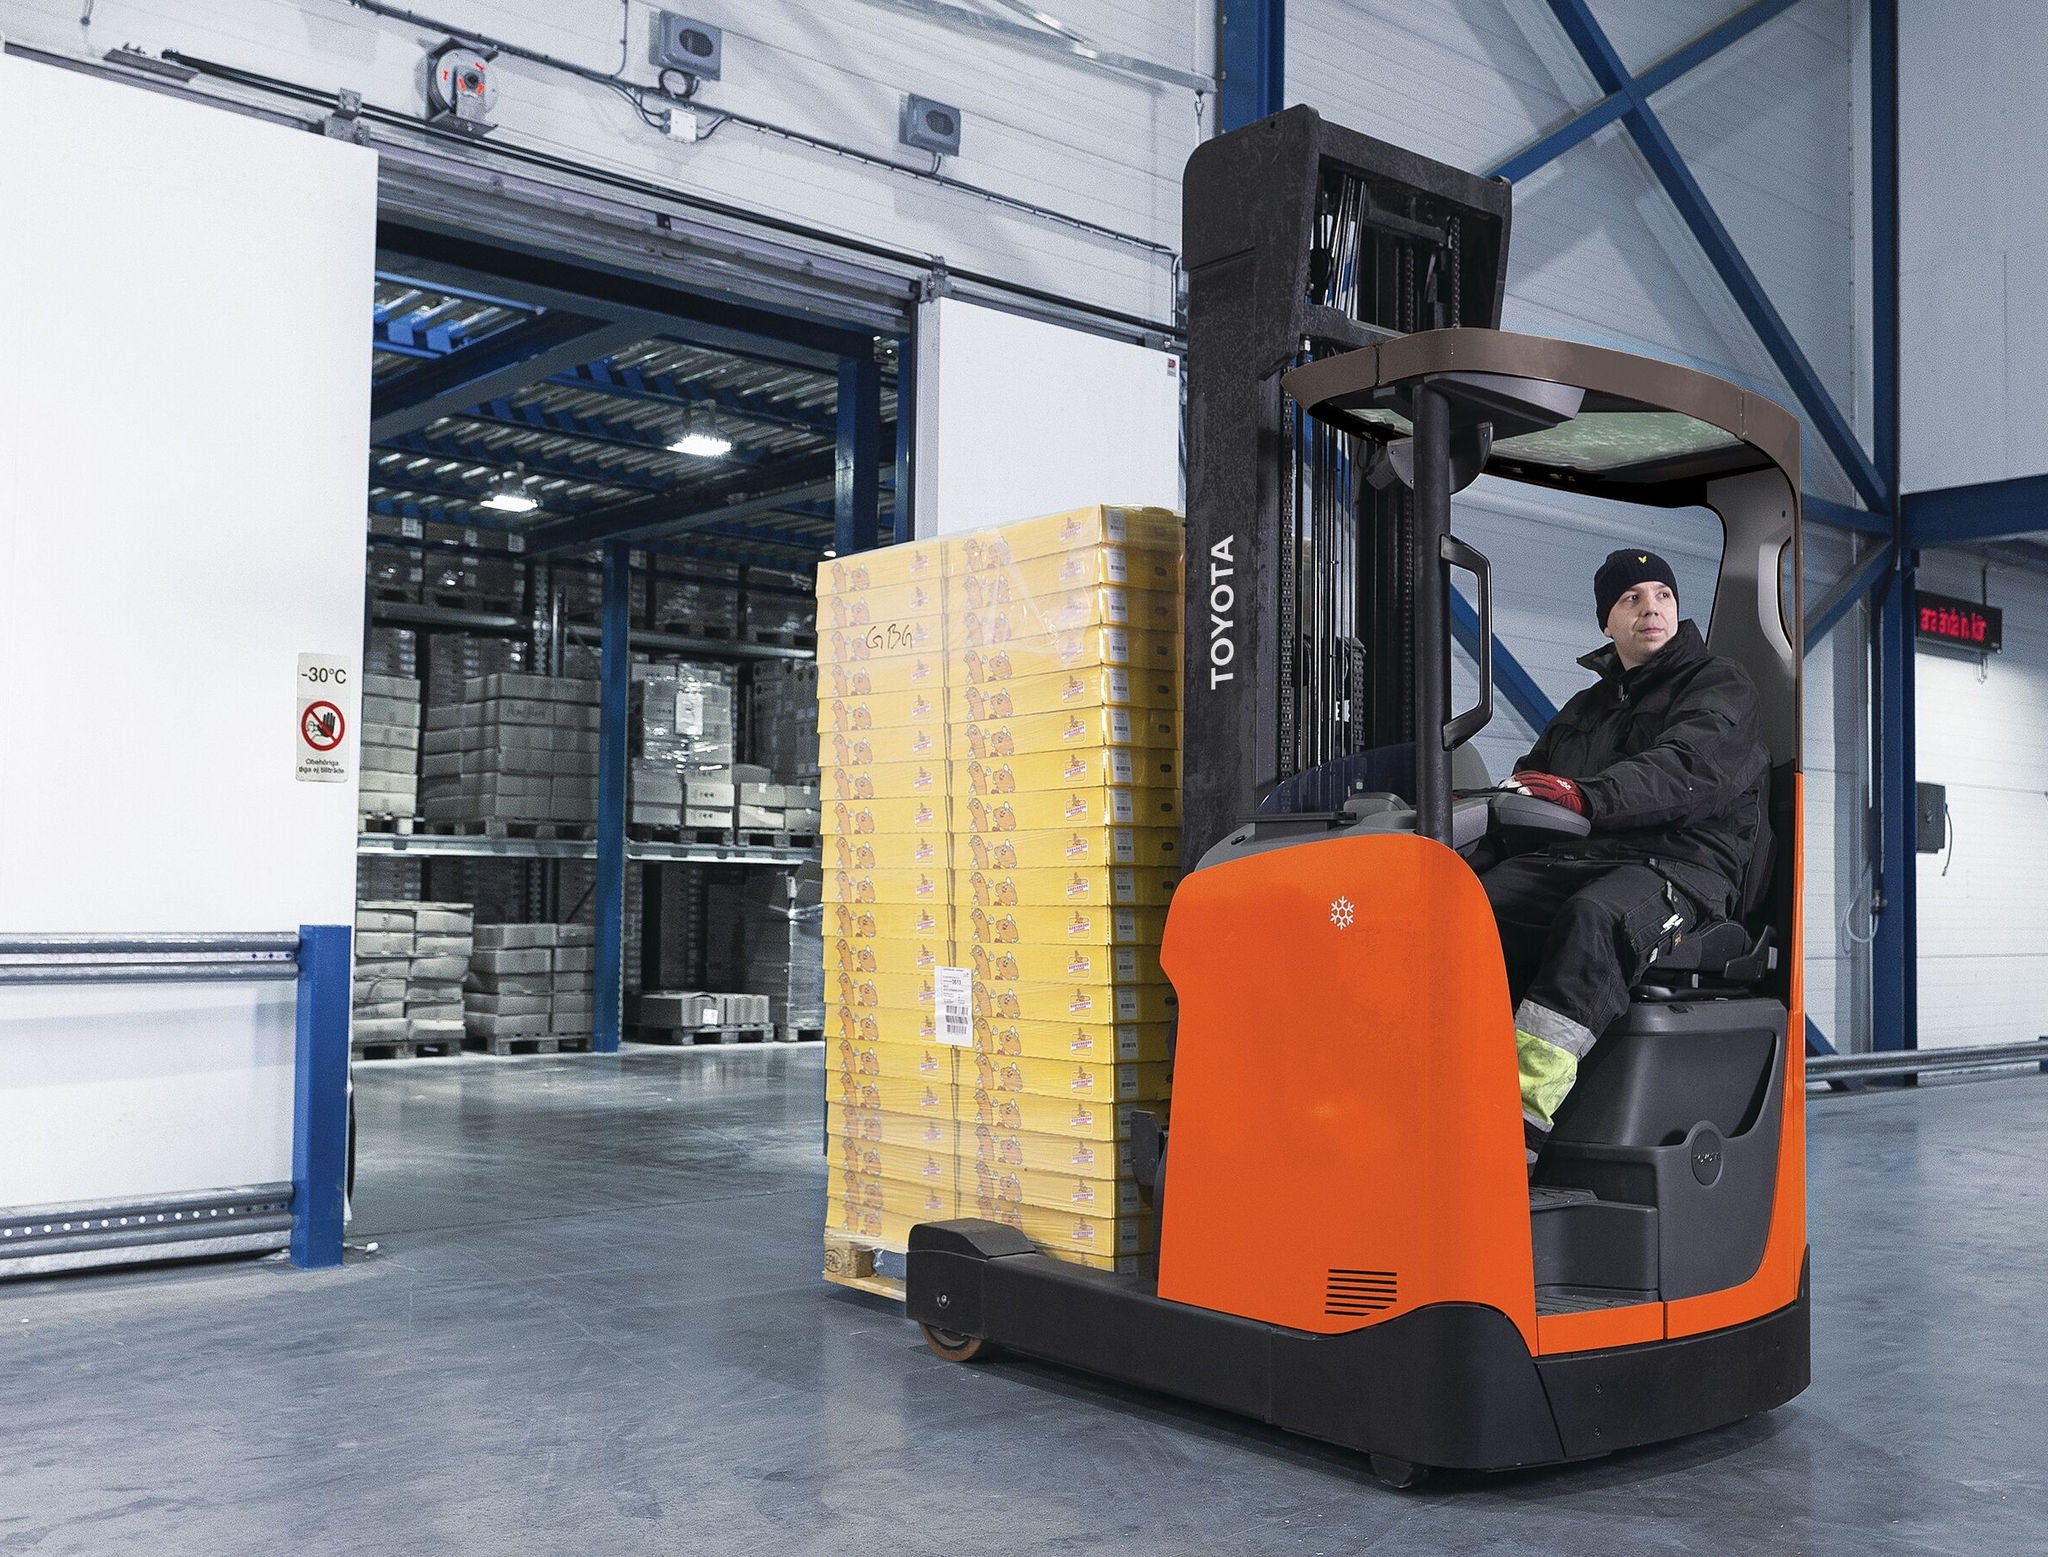 Man in coat and hat riding on orange forklift in cold storage environment